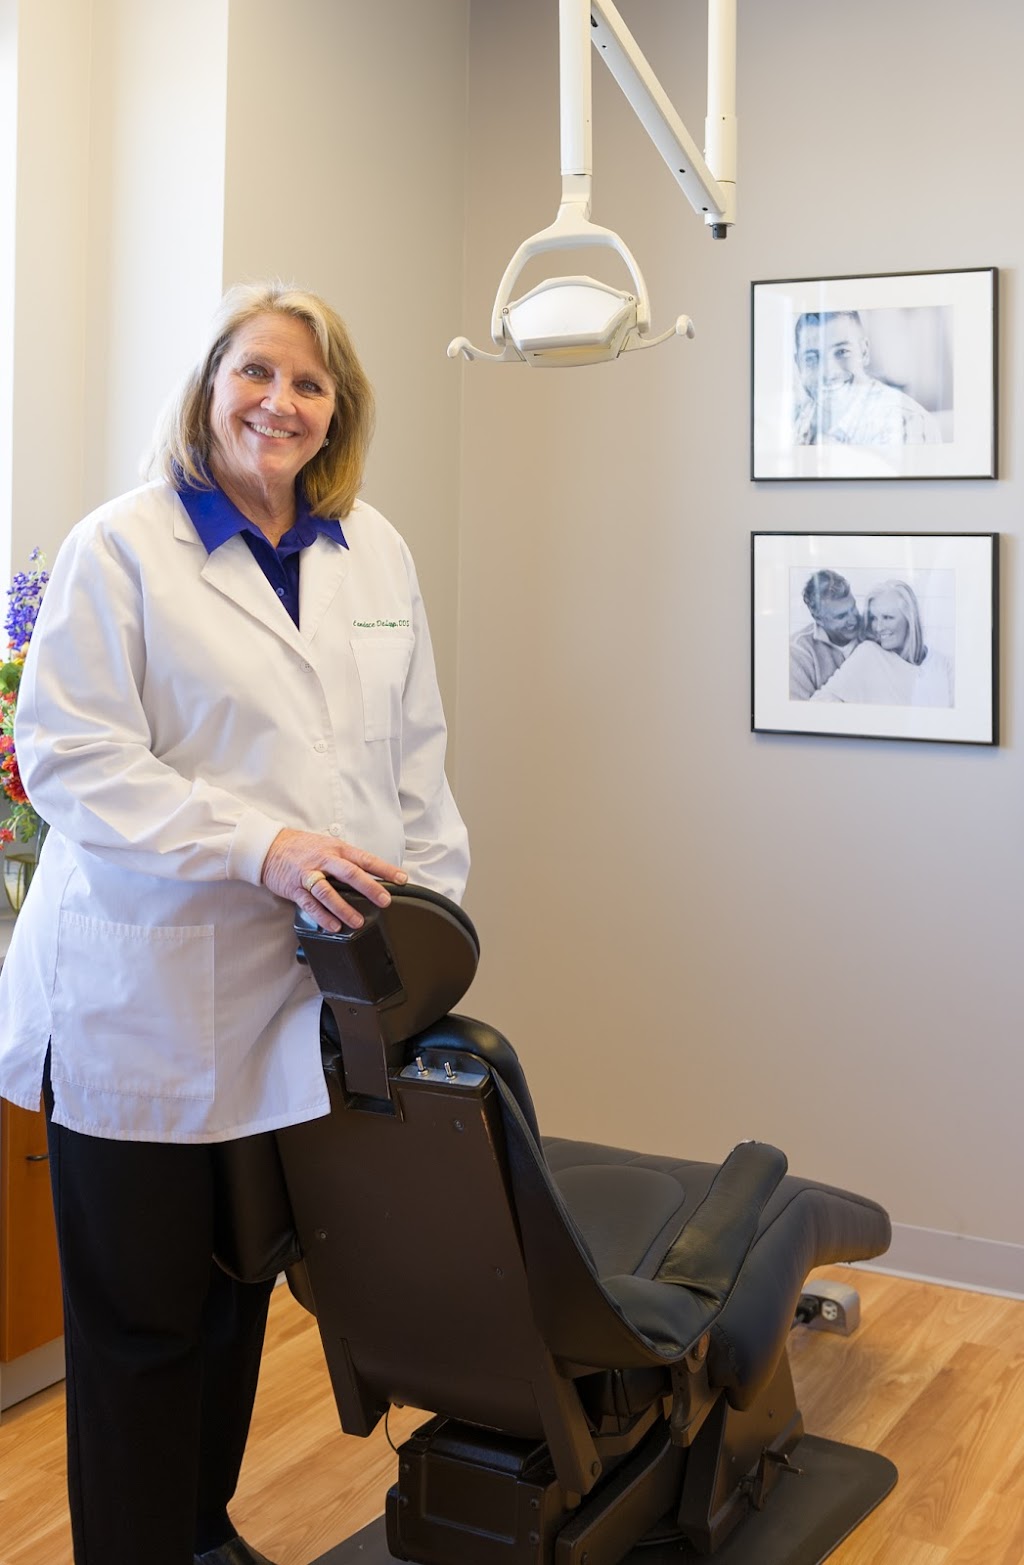 Cottonwood Dental Group-Highlands Ranch, CO. | 6660 Timberline Rd # 130, Highlands Ranch, CO 80130 | Phone: (303) 694-9740